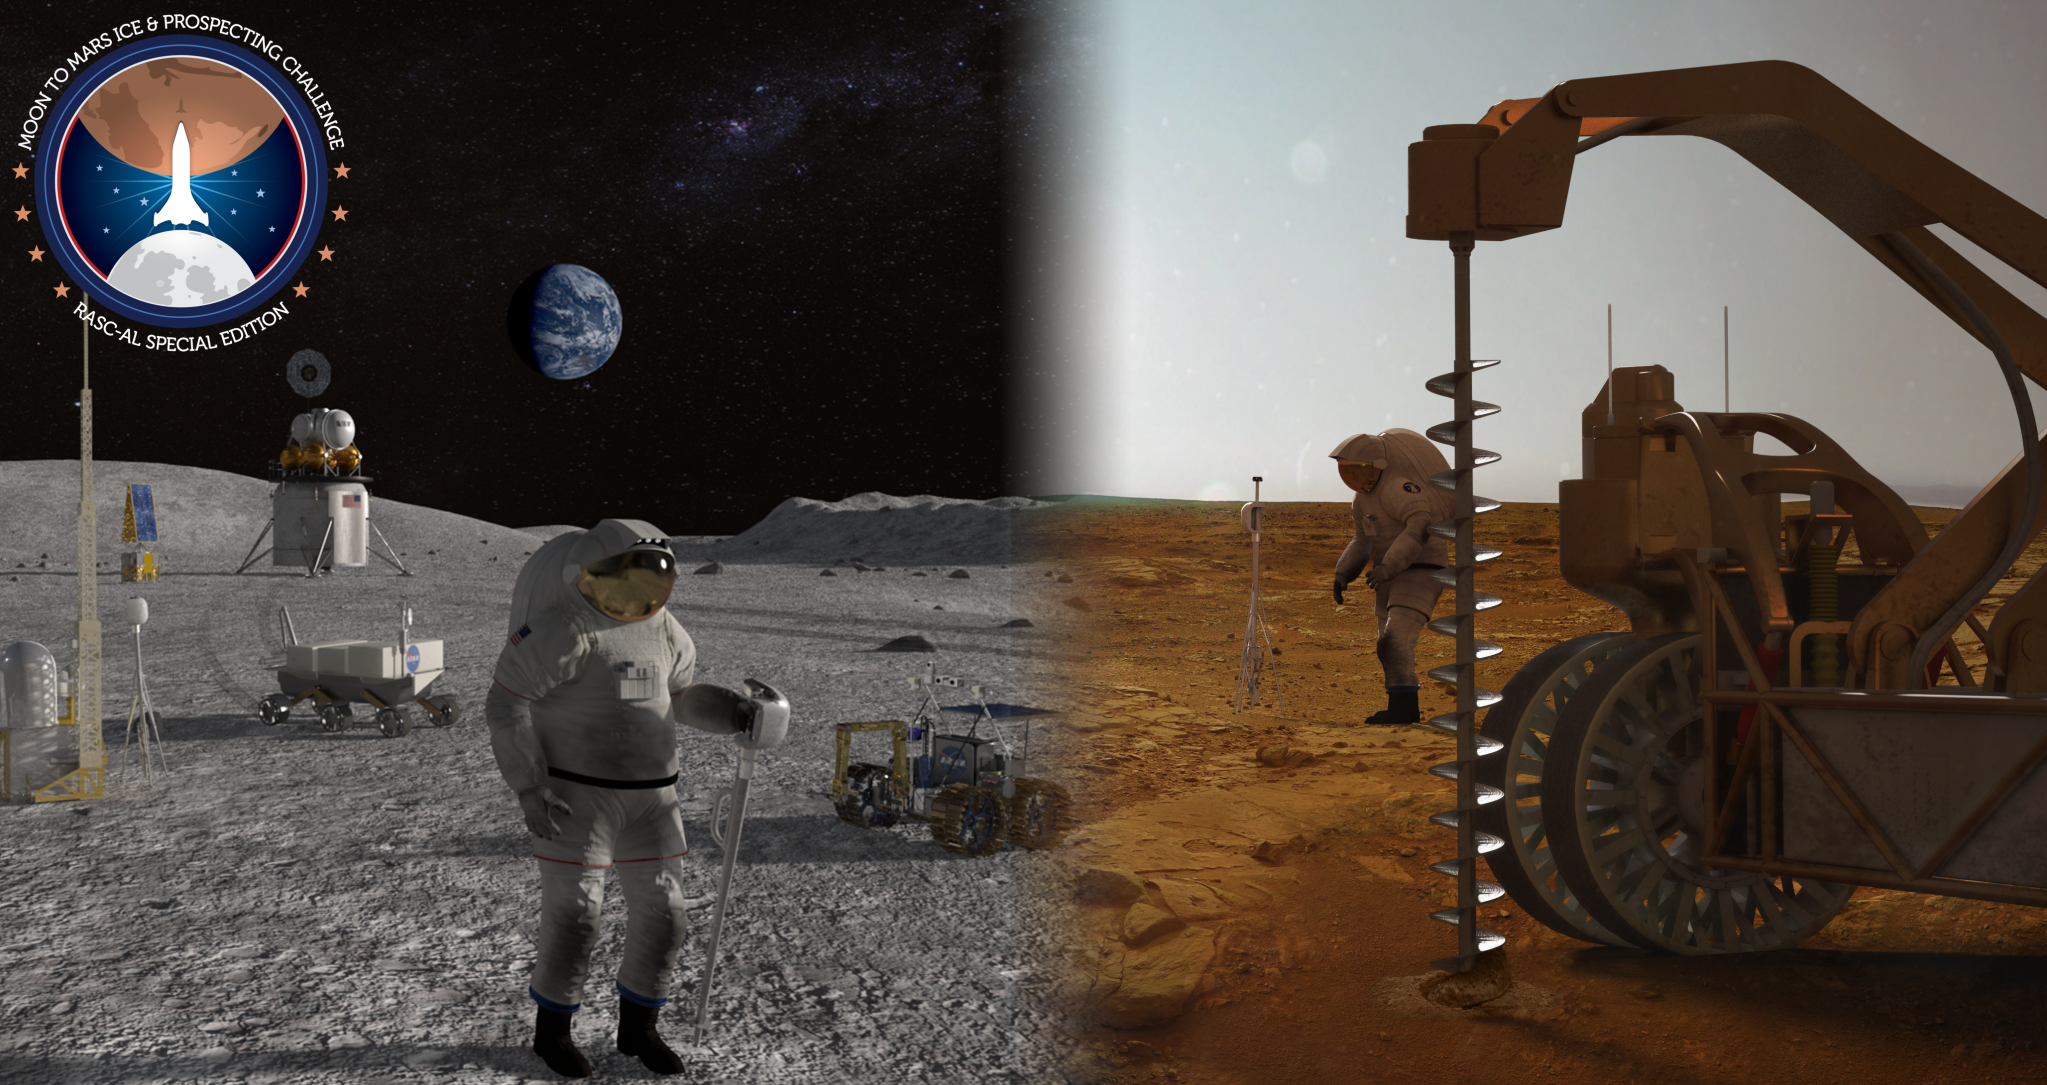 An illustration of astronauts on the Moon and Mars.